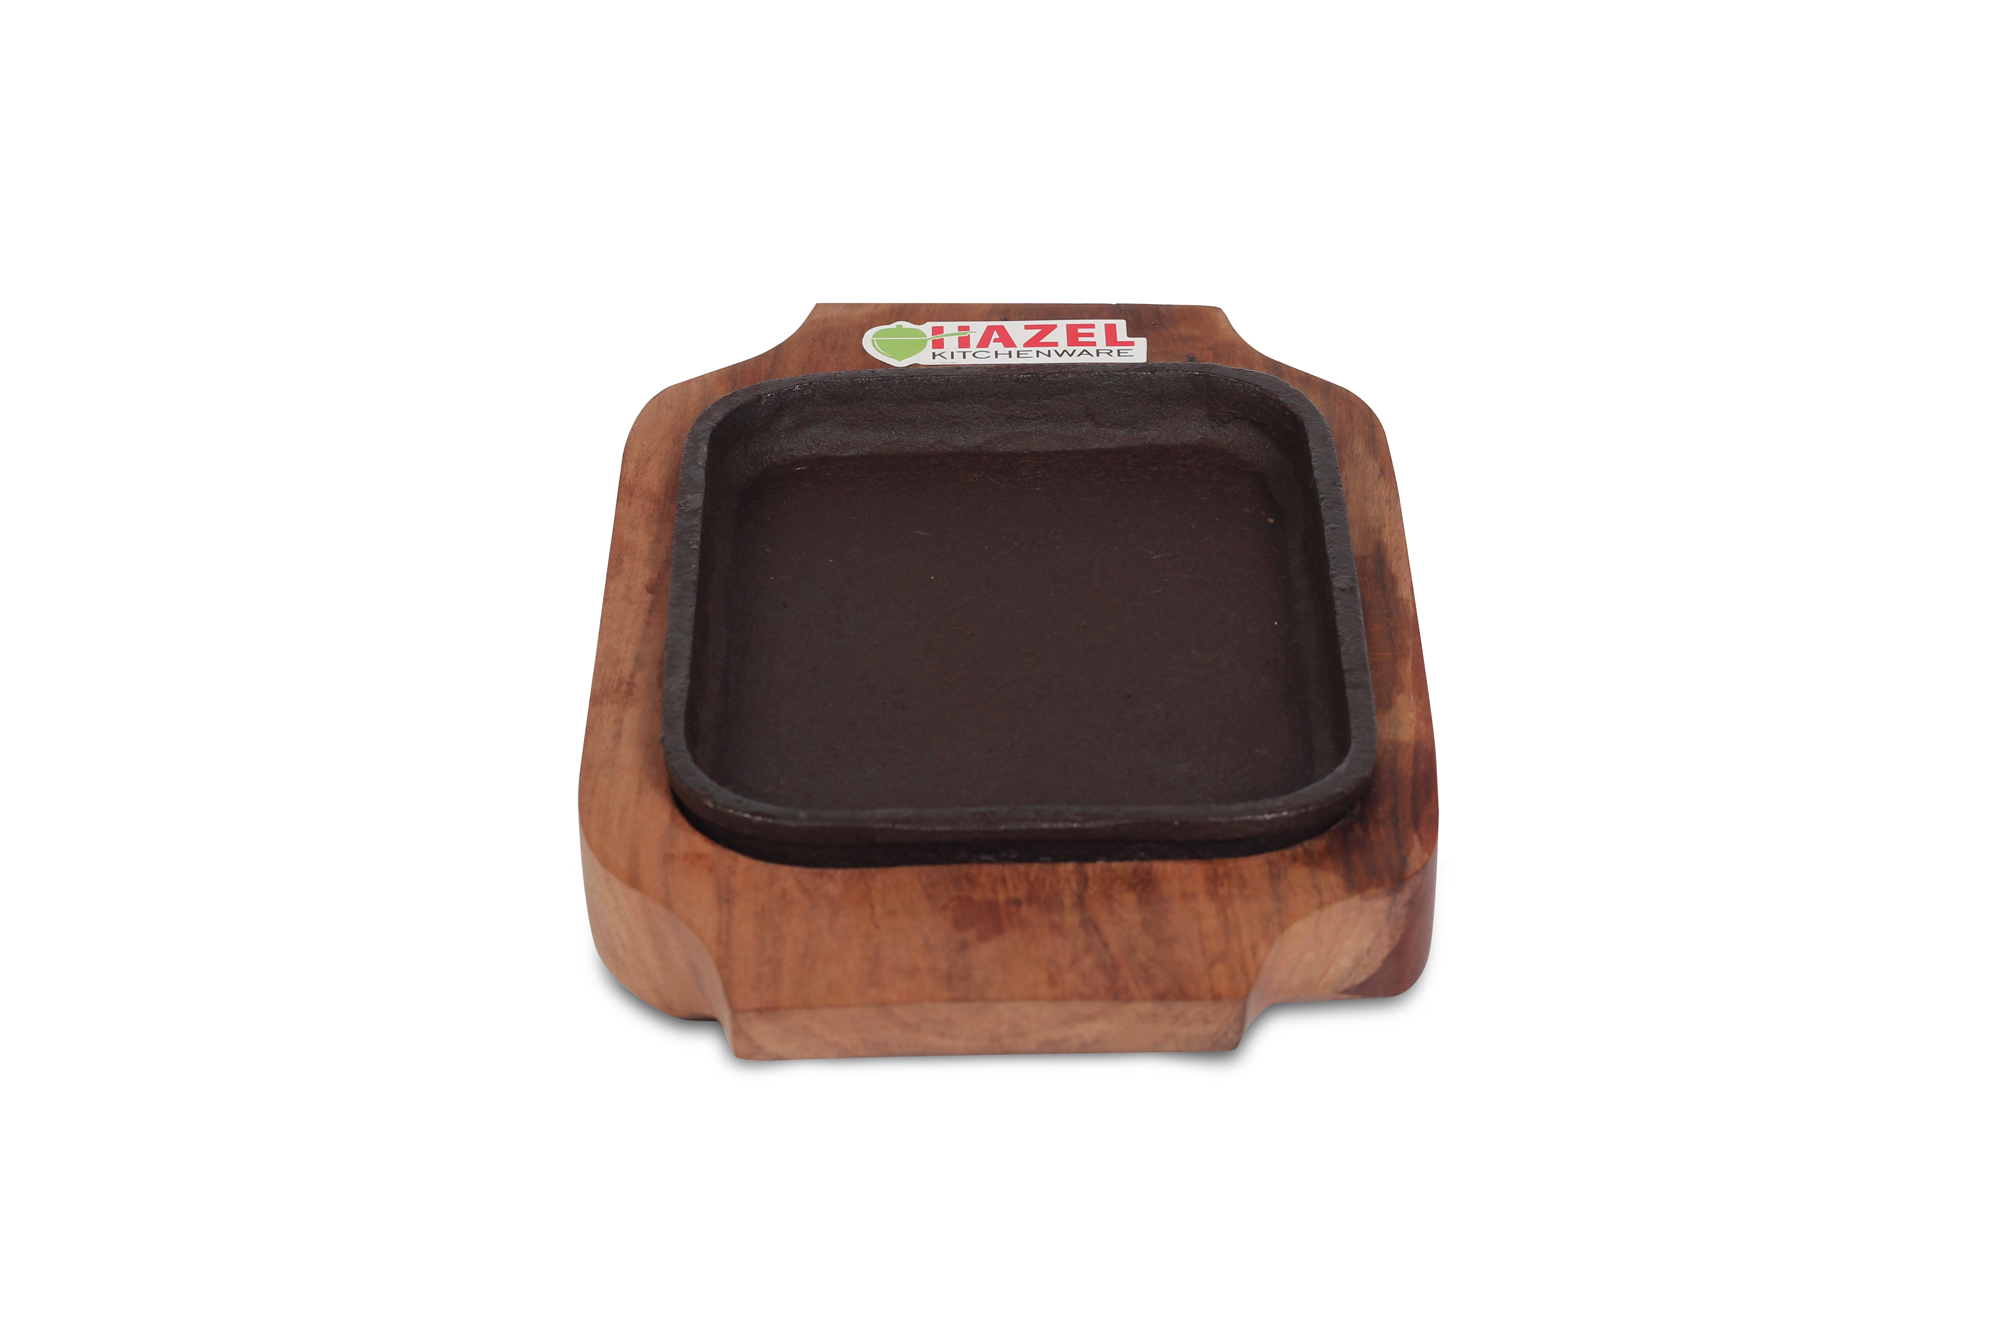 HAZEL Sizzling Brownie Plate / Tray With Wooden Base Square 6 Inch